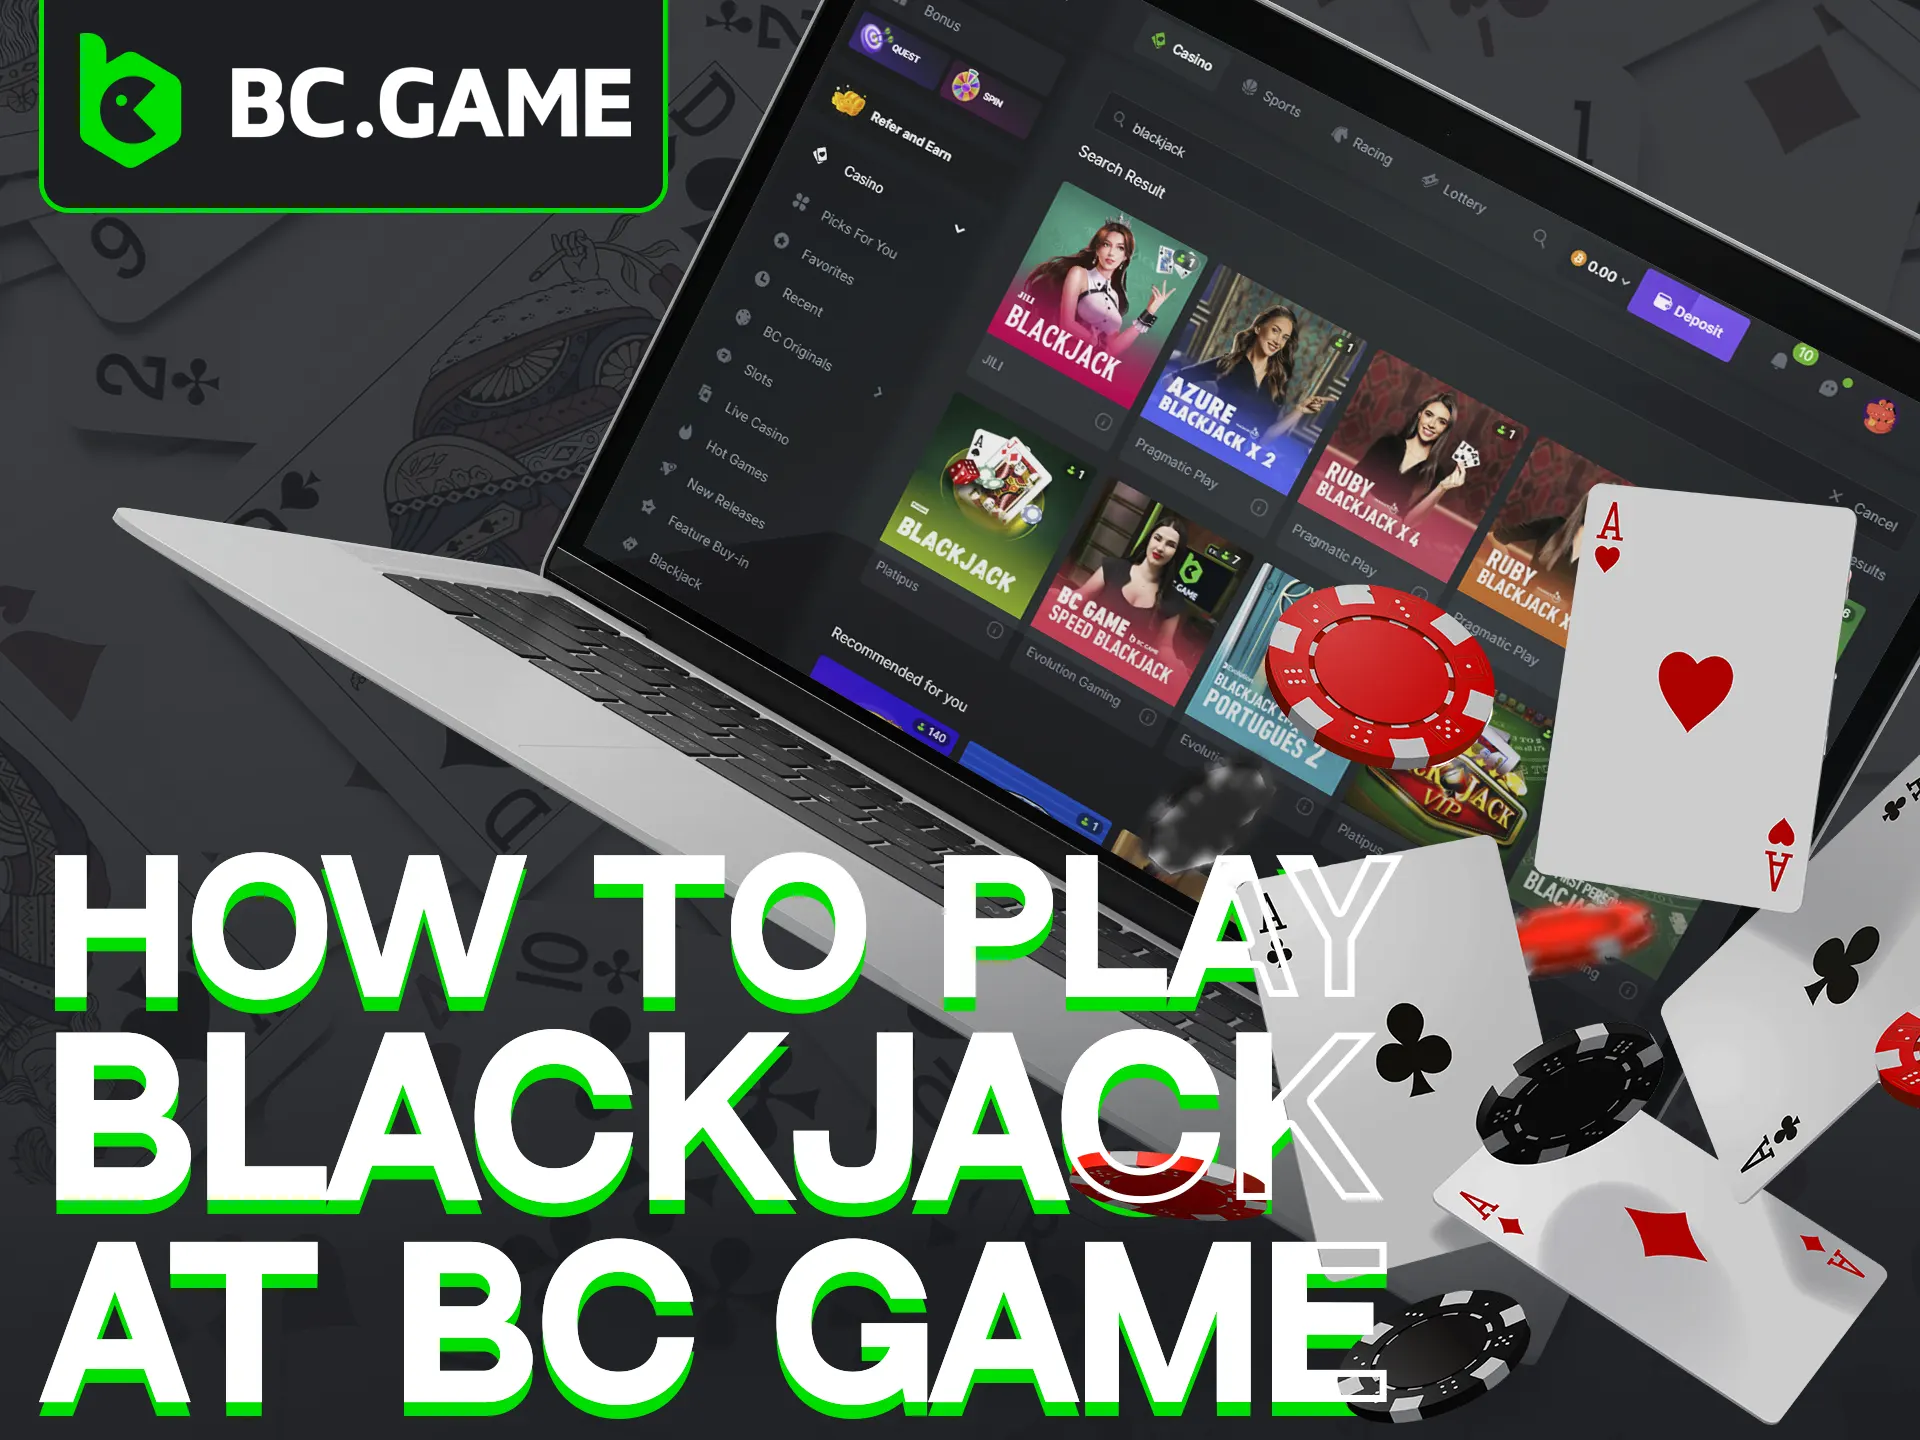 Join BC Game, register, deposit, and play Blackjack hassle-free.